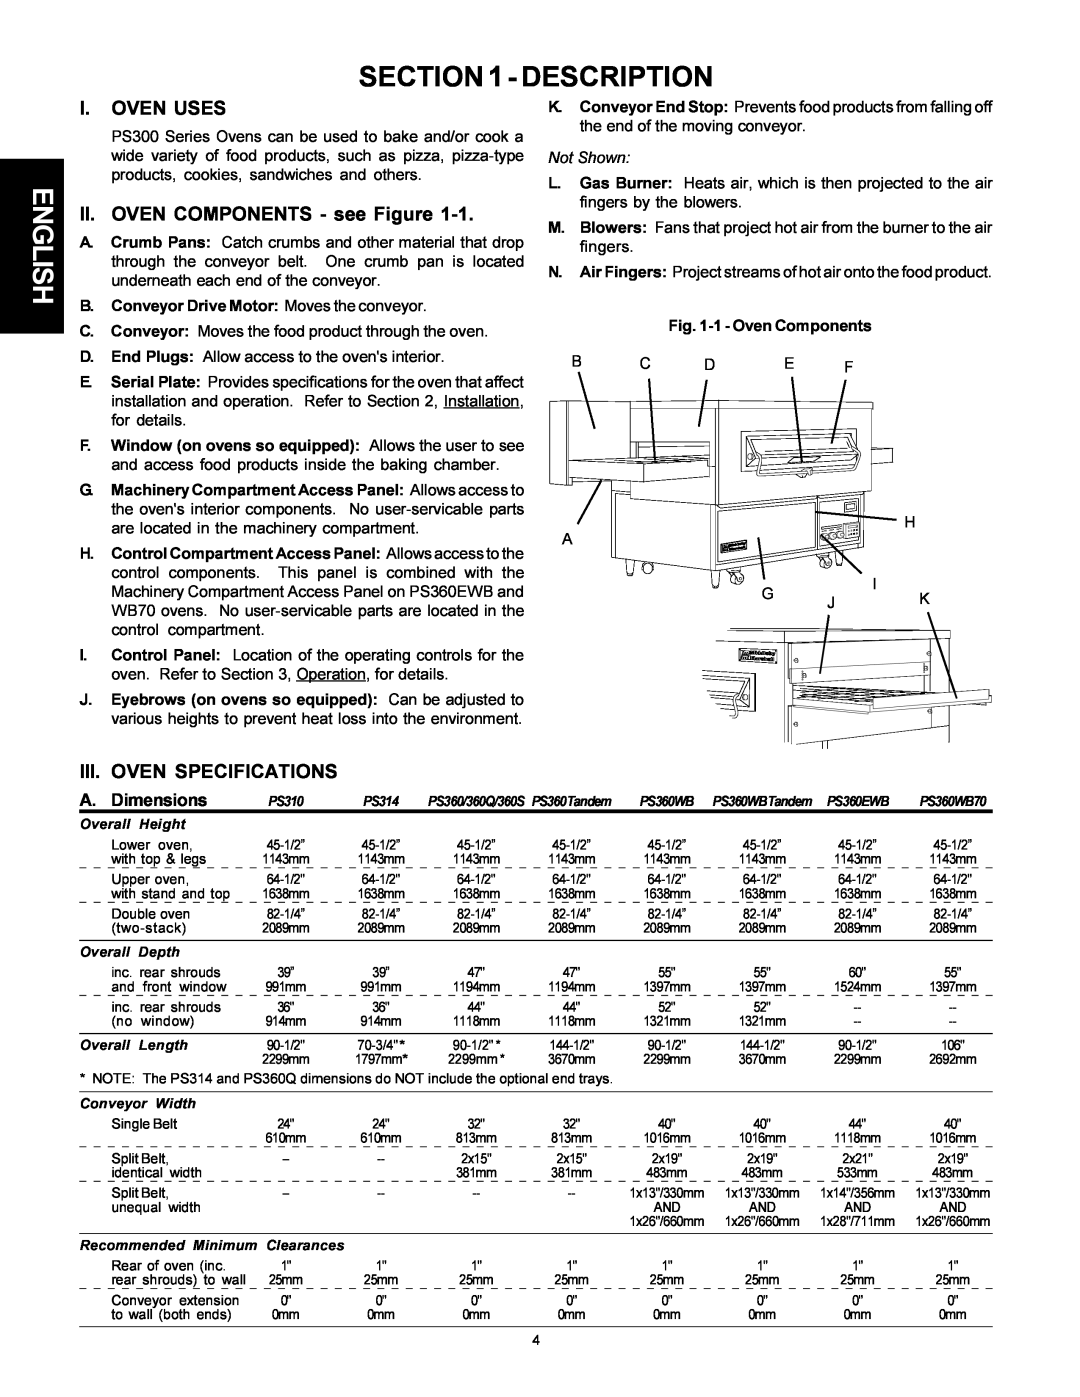 Middleby Marshall PS300F Description, English, I.Oven Uses, II. OVEN COMPONENTS - see Figure, Oven Specifications 